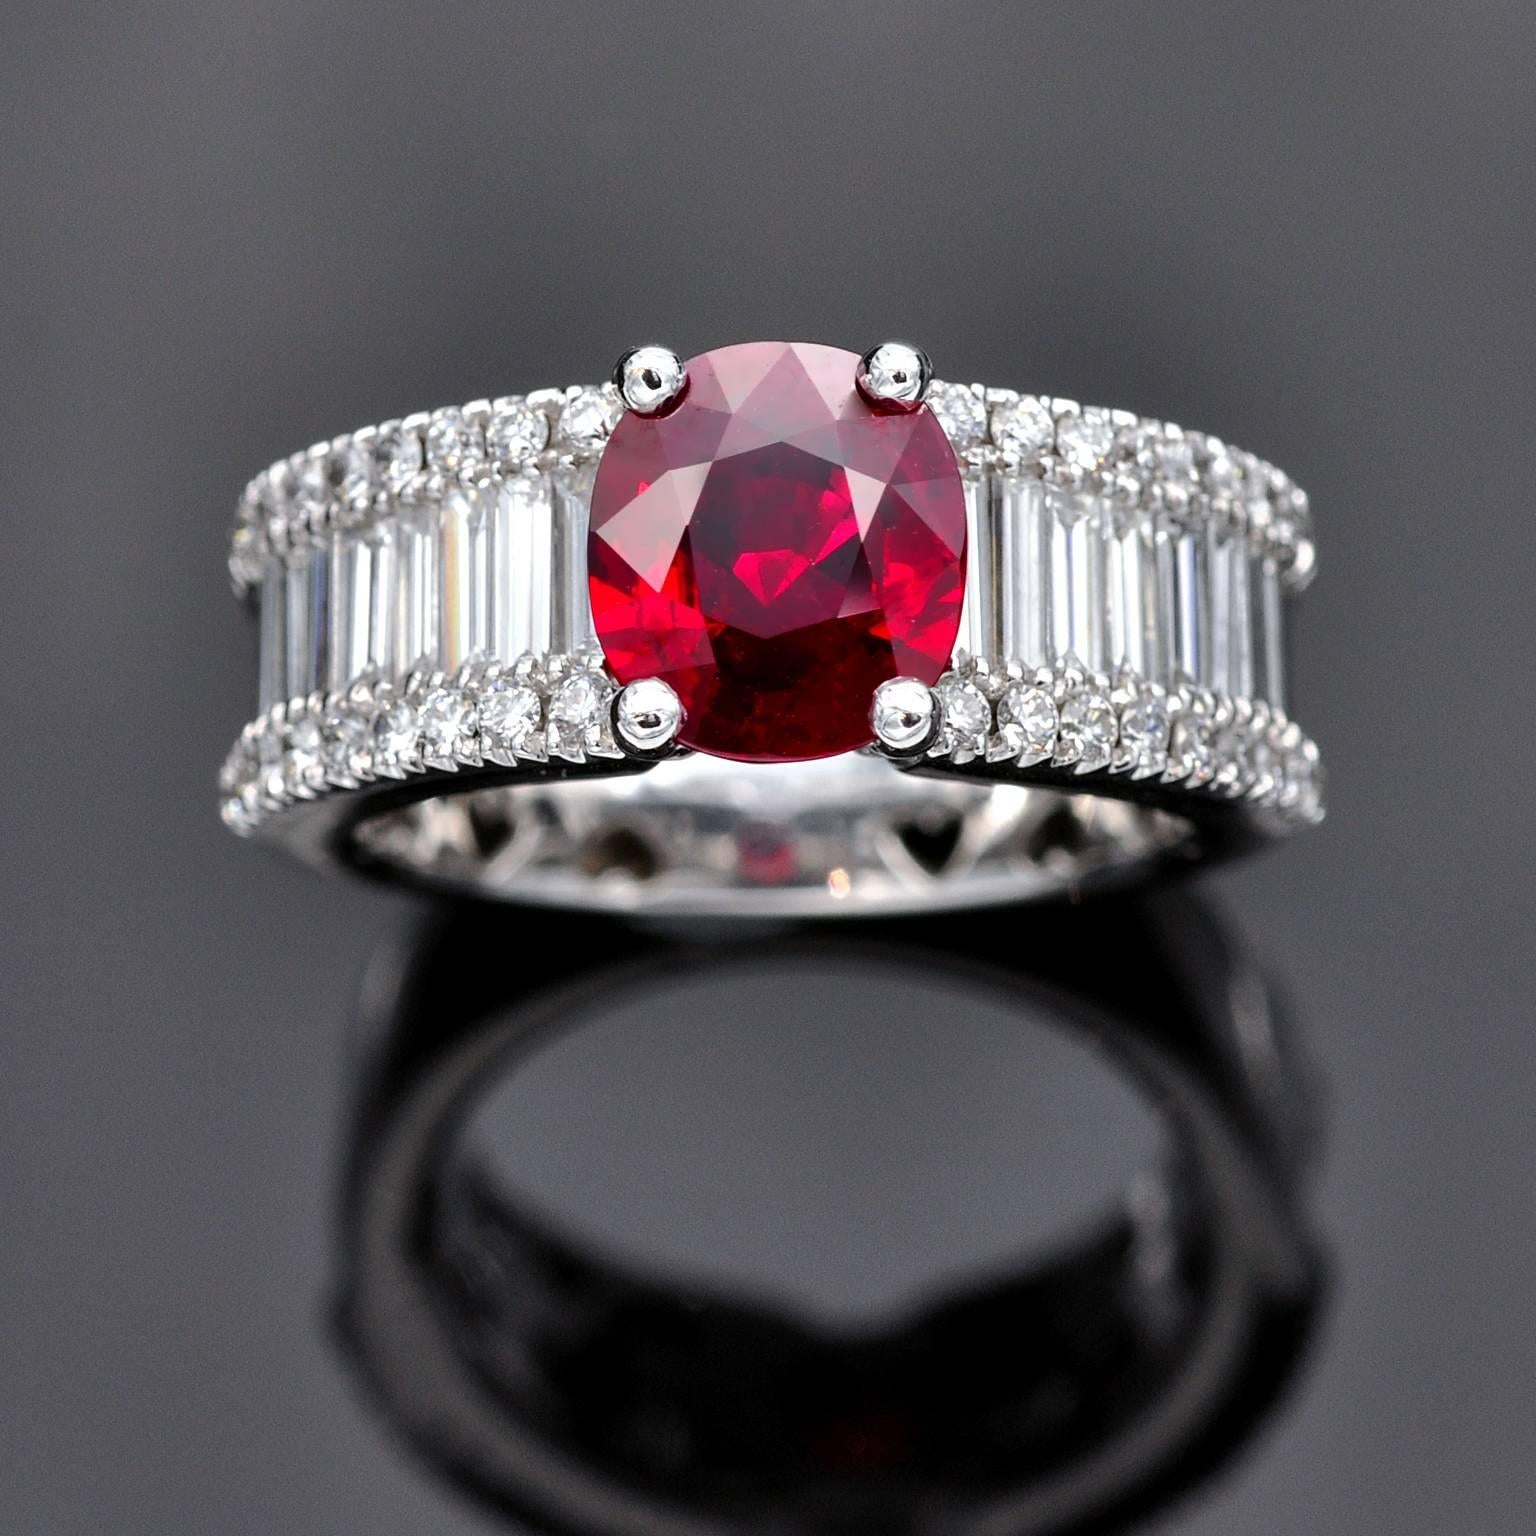 A Pigeon-Blood Ruby weighing 2.36 carats set on a sublime baguette and round diamond ring.

The ruby comes with a GRS certificate stating that it is a Burma ruby , Pigeon blood color and heat enhanced ( natural stone)  . The 1.41 carat diamonds are